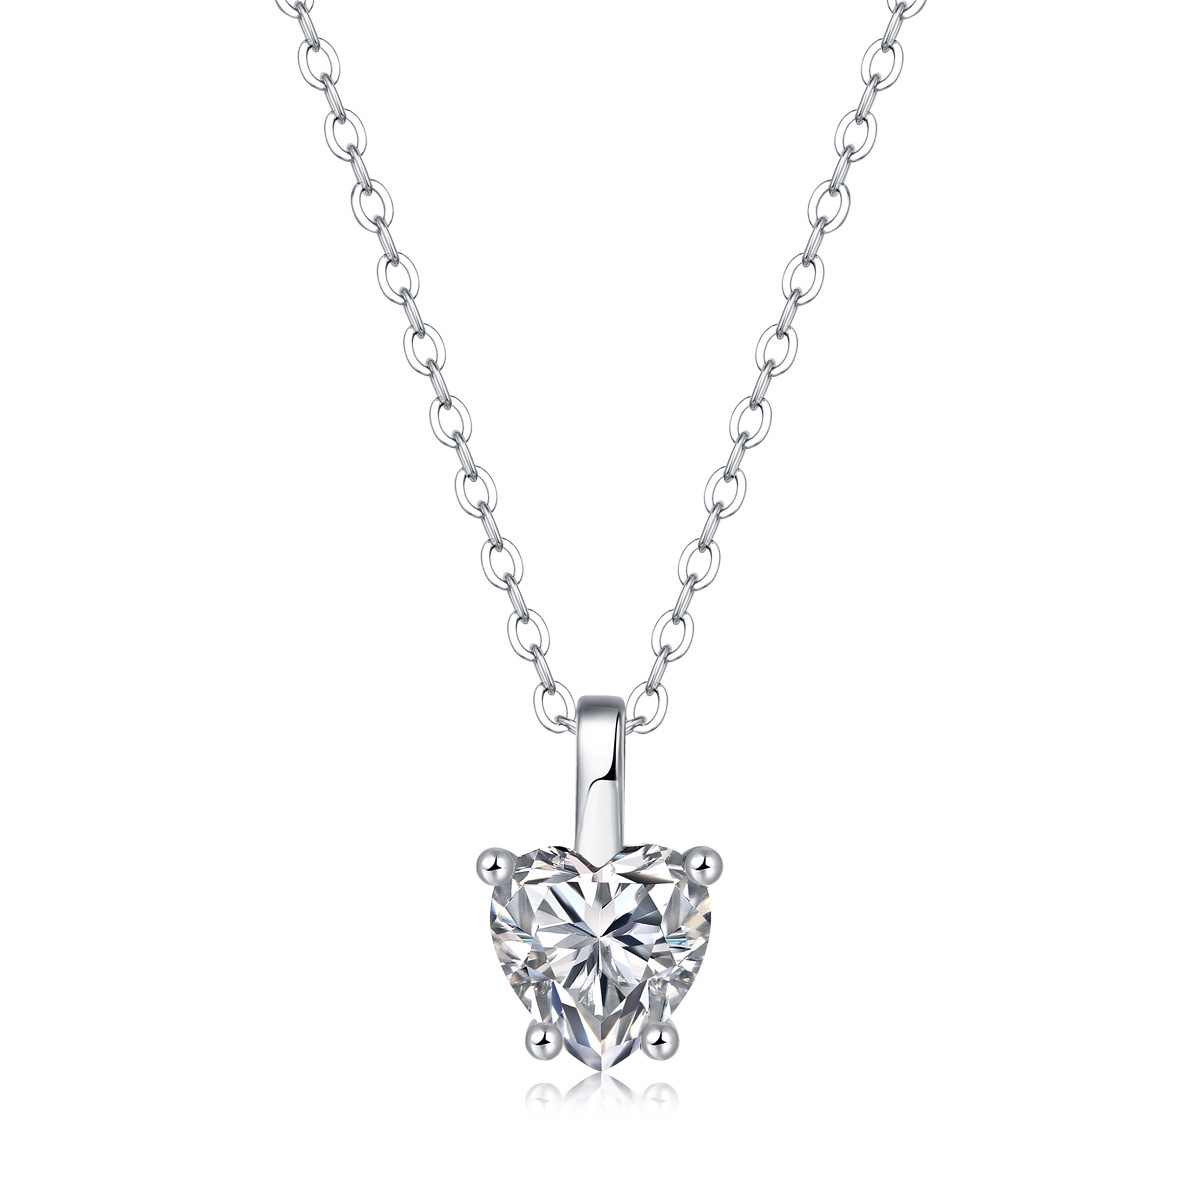 0.6Ct Moissanite Necklace Necklace For Her Sterling Silver Necklace Minimalist Necklace Heart Necklace Diamond Necklace Joyería Collares Collares de cristal 